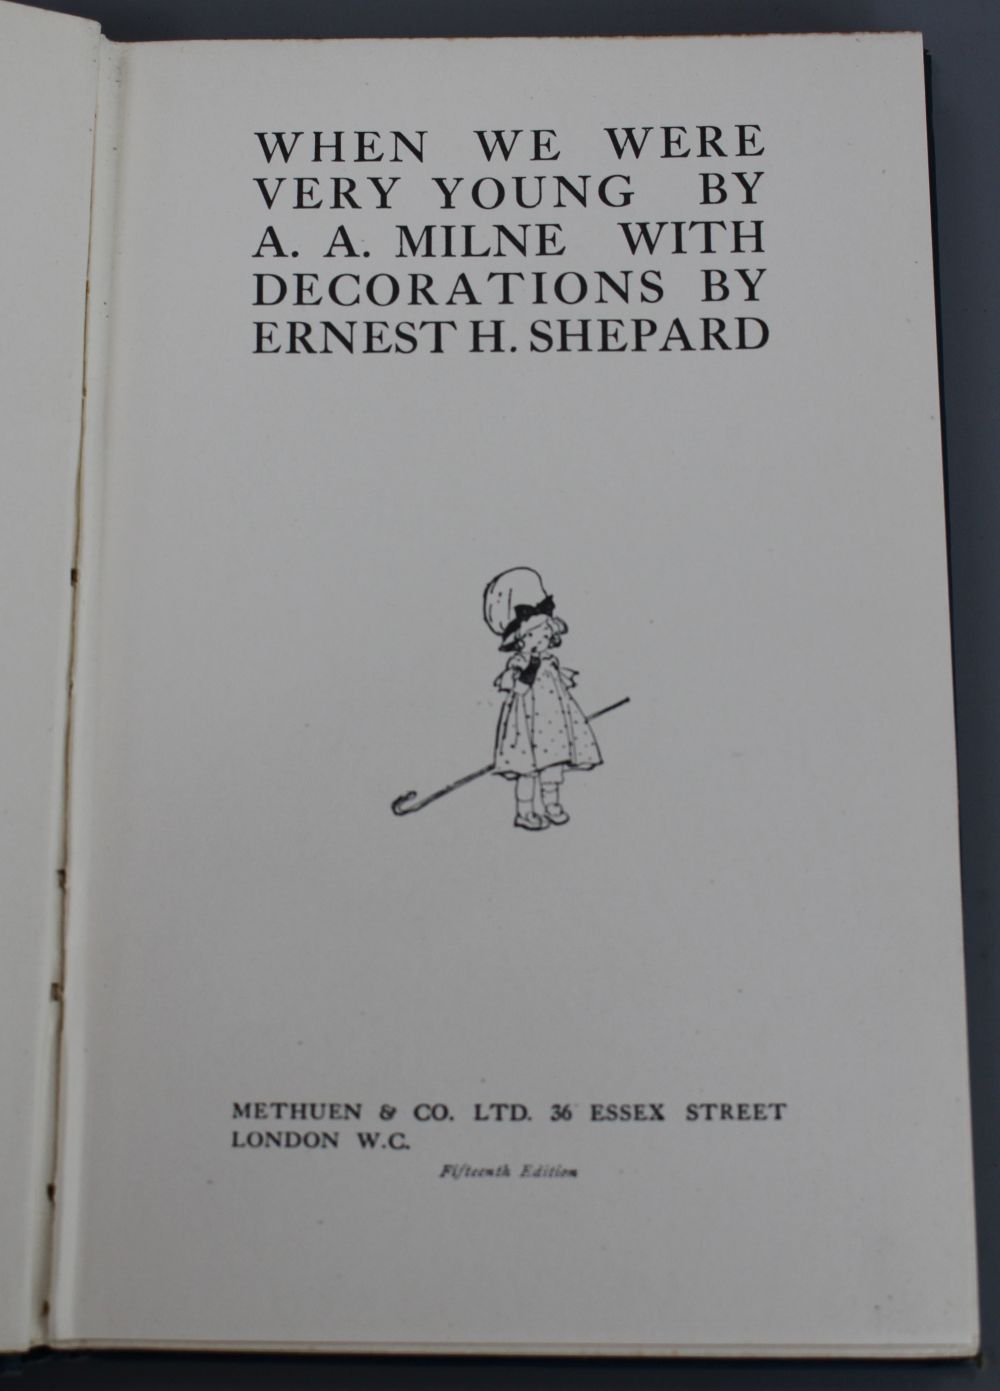 Rouse, W.H.D. - The Latin Struwwelpeter, Black & Sons, Glasgow [1934] and Milne, A.A. - When We Were Very Young, 15th edition, 8vo,